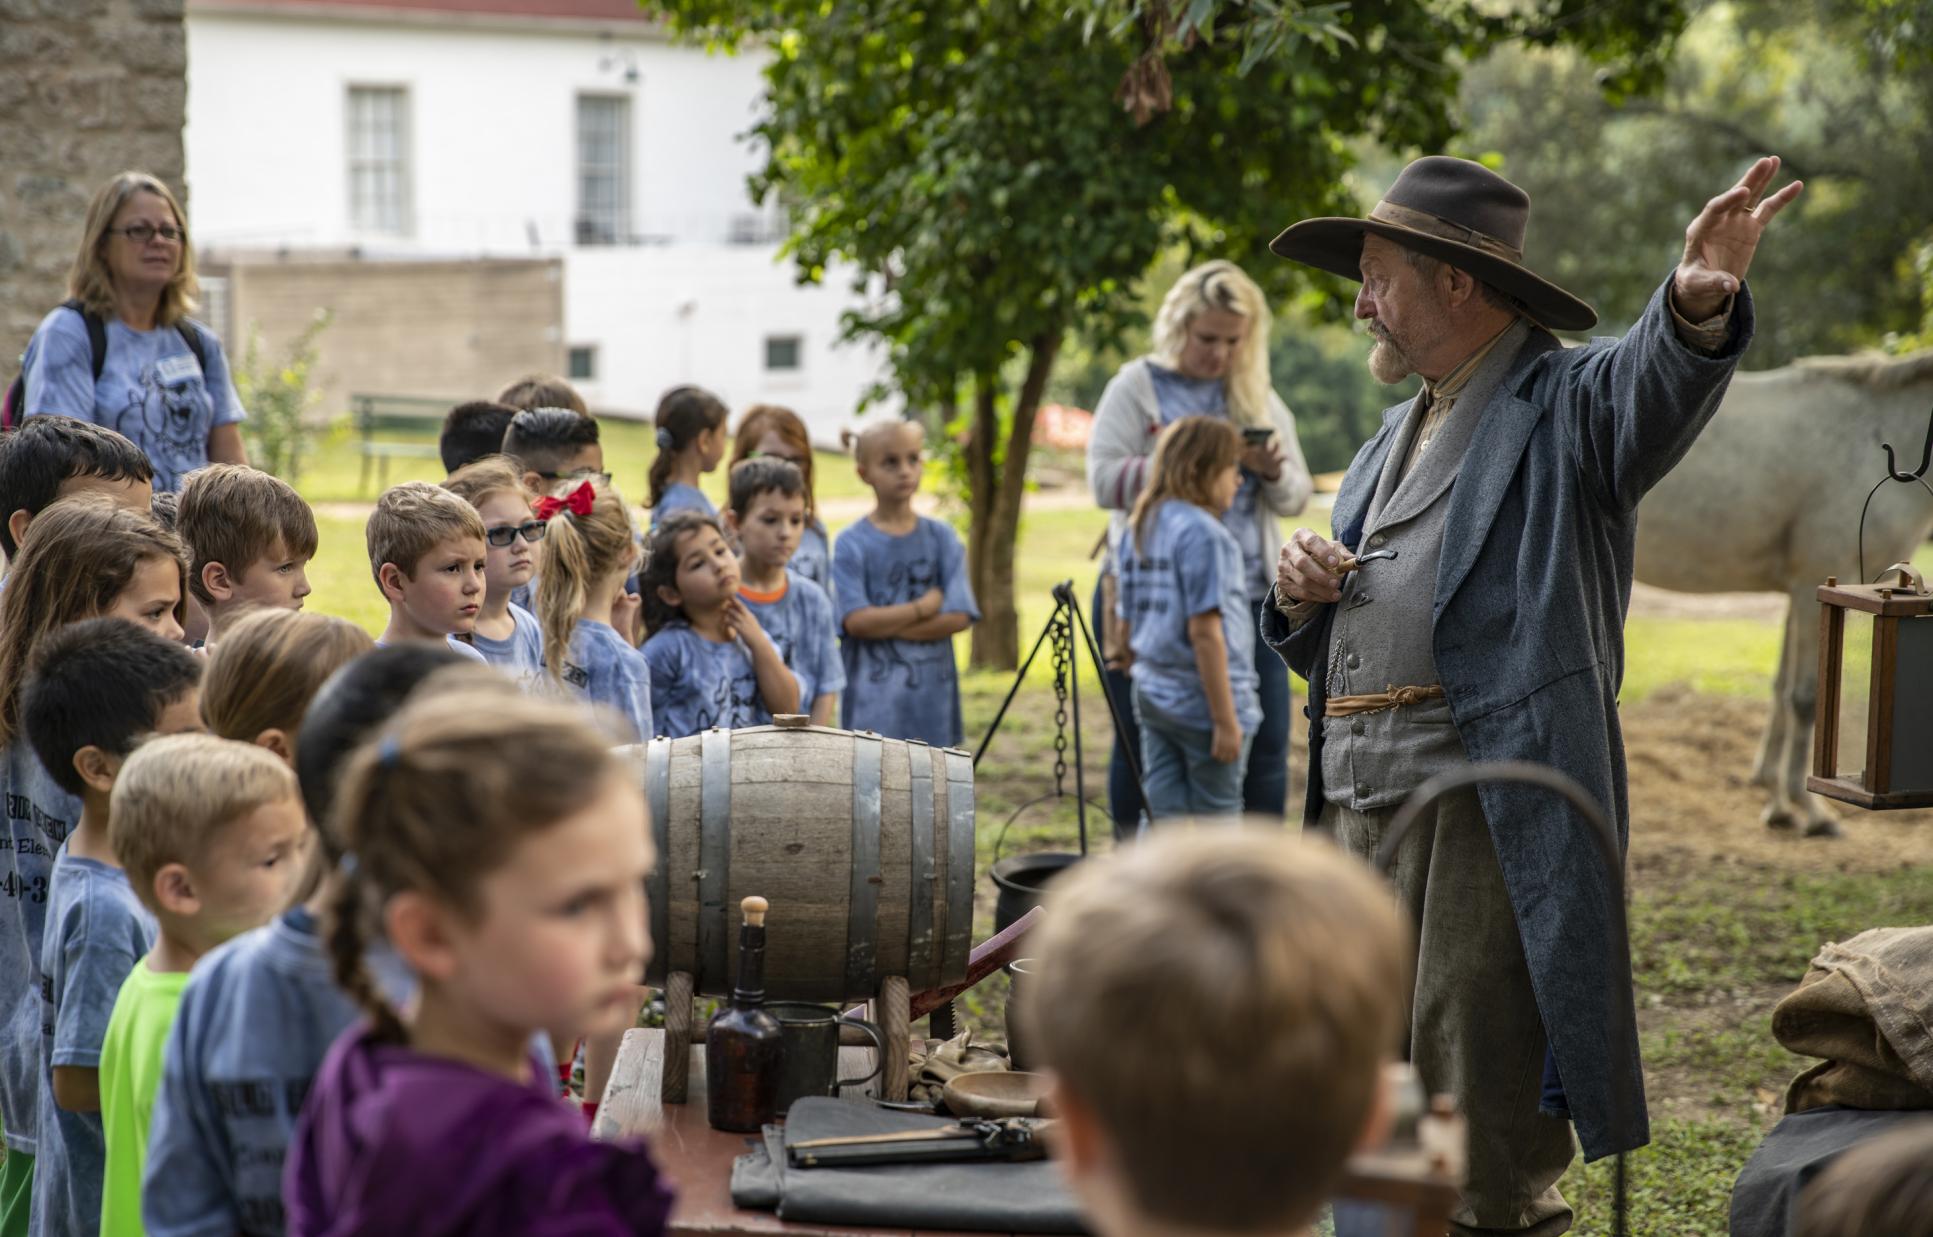 Reenactor talking to children during a living history event